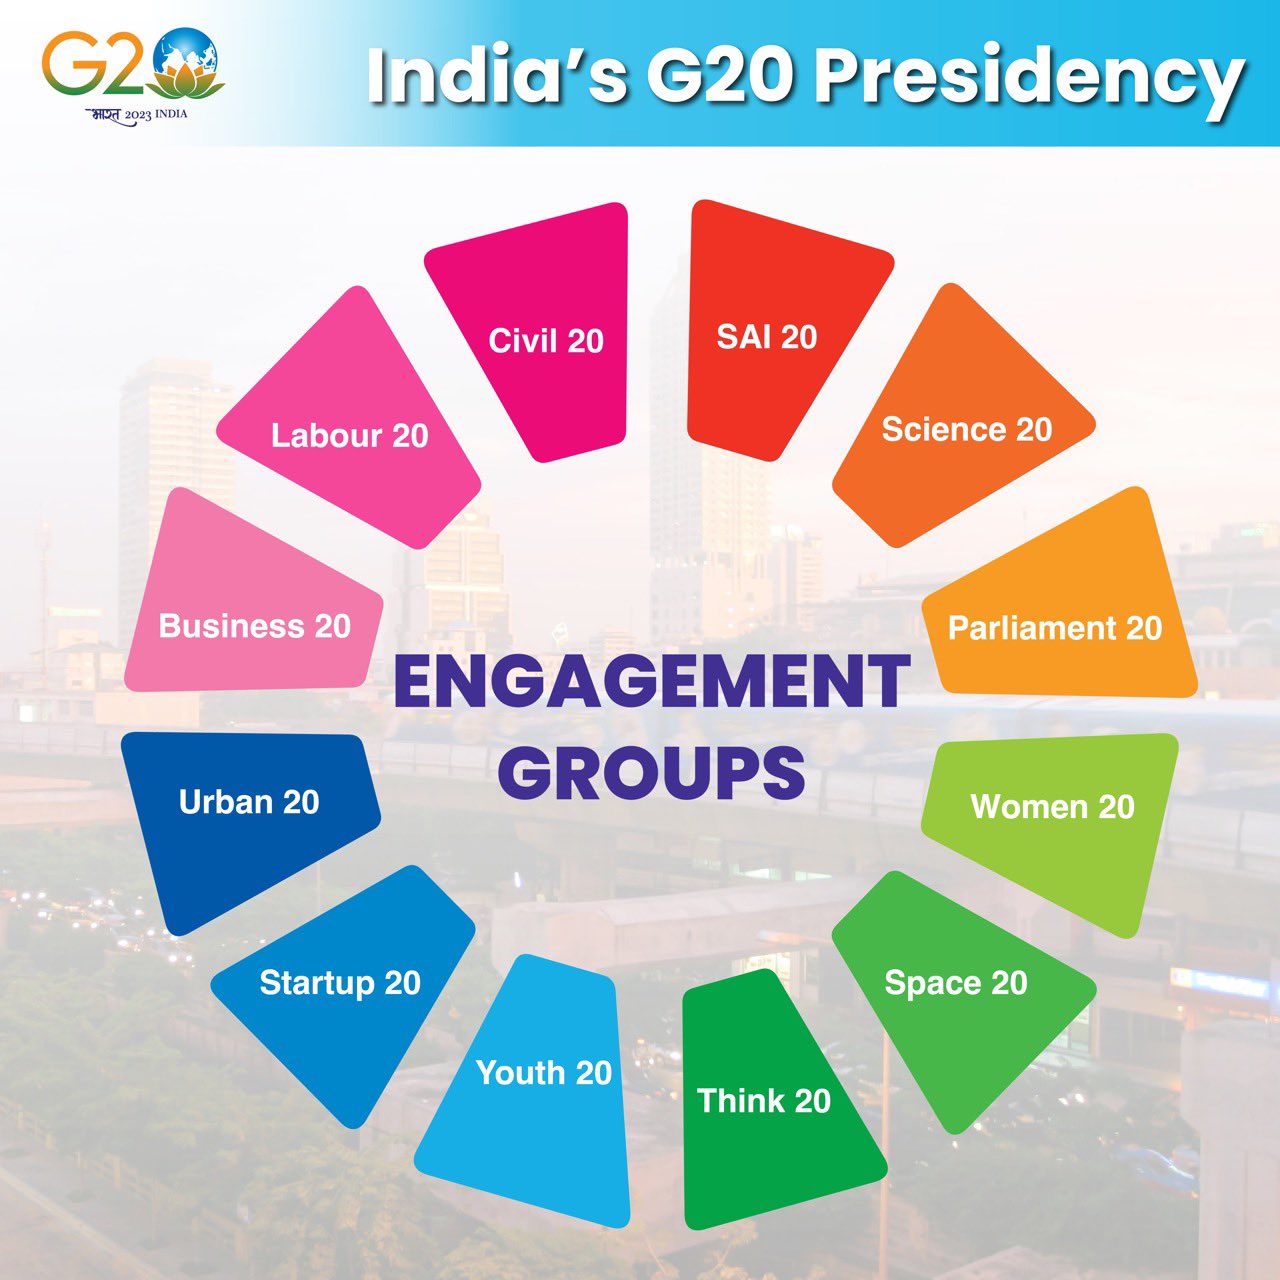 G20 India on Twitter: "Startup20 Engagement Group will be established under  #G20India, recognising the role of startups in driving innovation  responding to changing global scenario. @amitabhk87 @harshvshringla  @DPIITGoI #G20India #G20 #Startup https ...